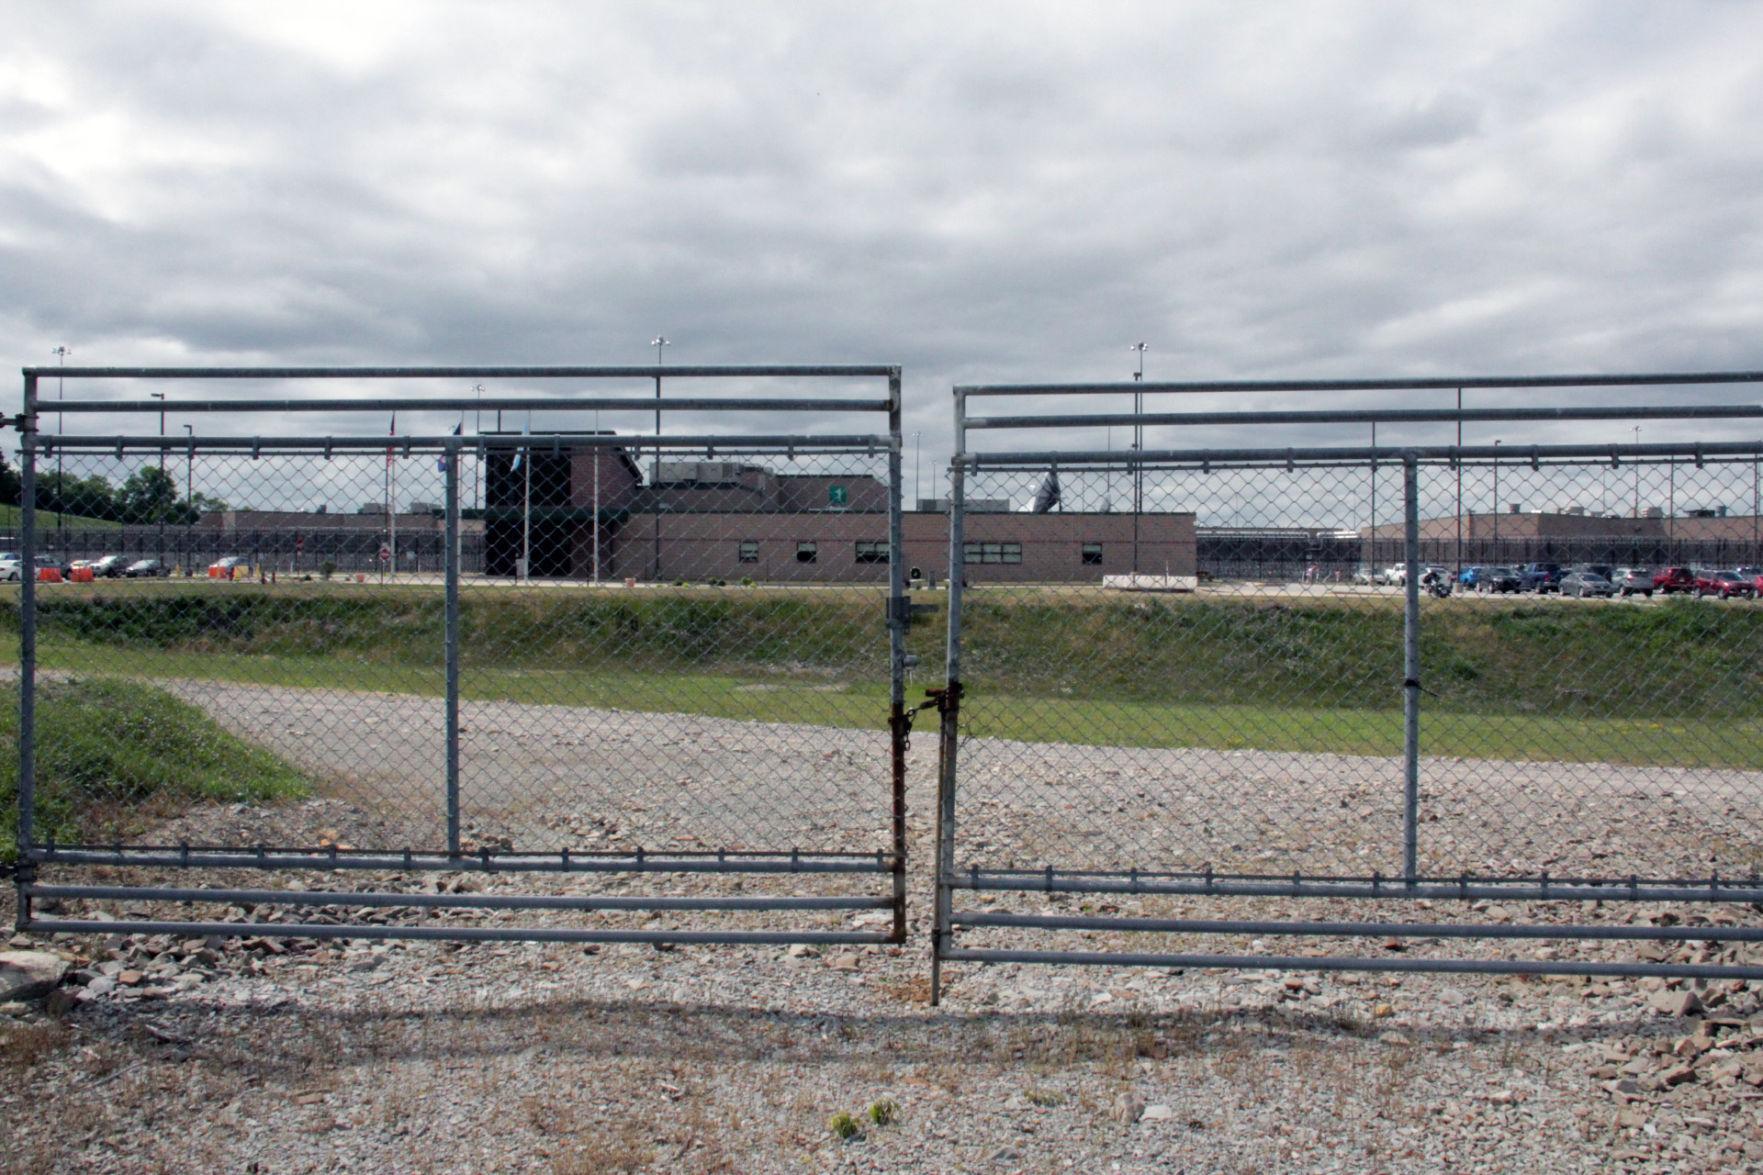 “America’s Trash Can”: Toxic Prisons and Environmental Racism